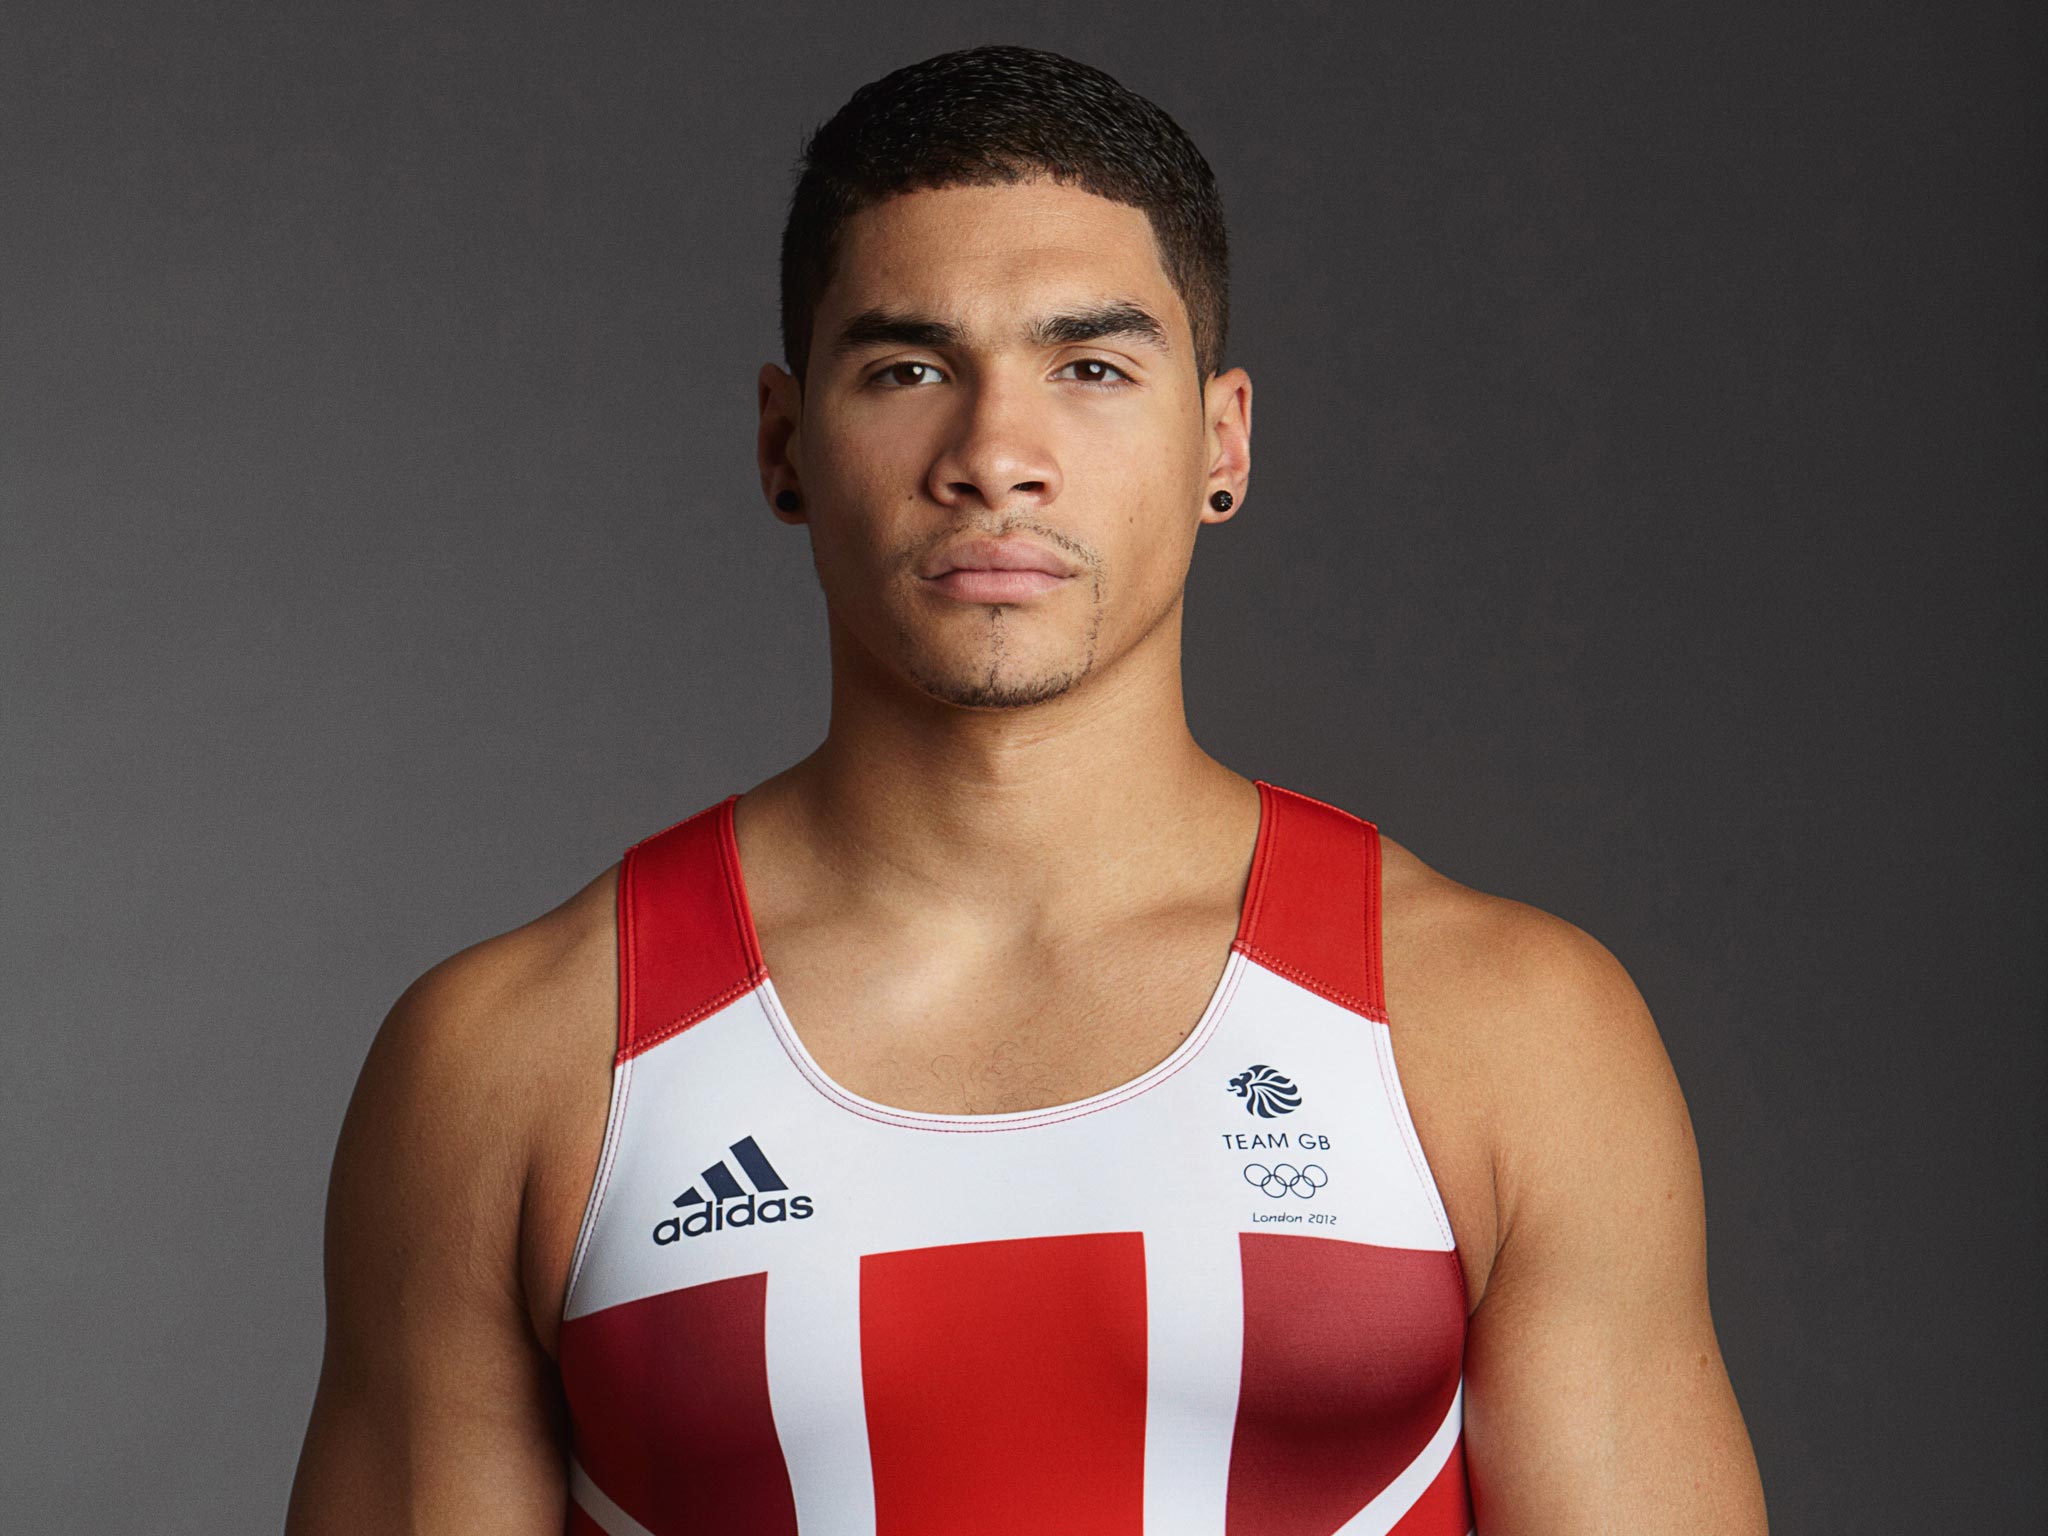 Louis Smith has been punished too harshly by the British Gymnastic Association | The Independent